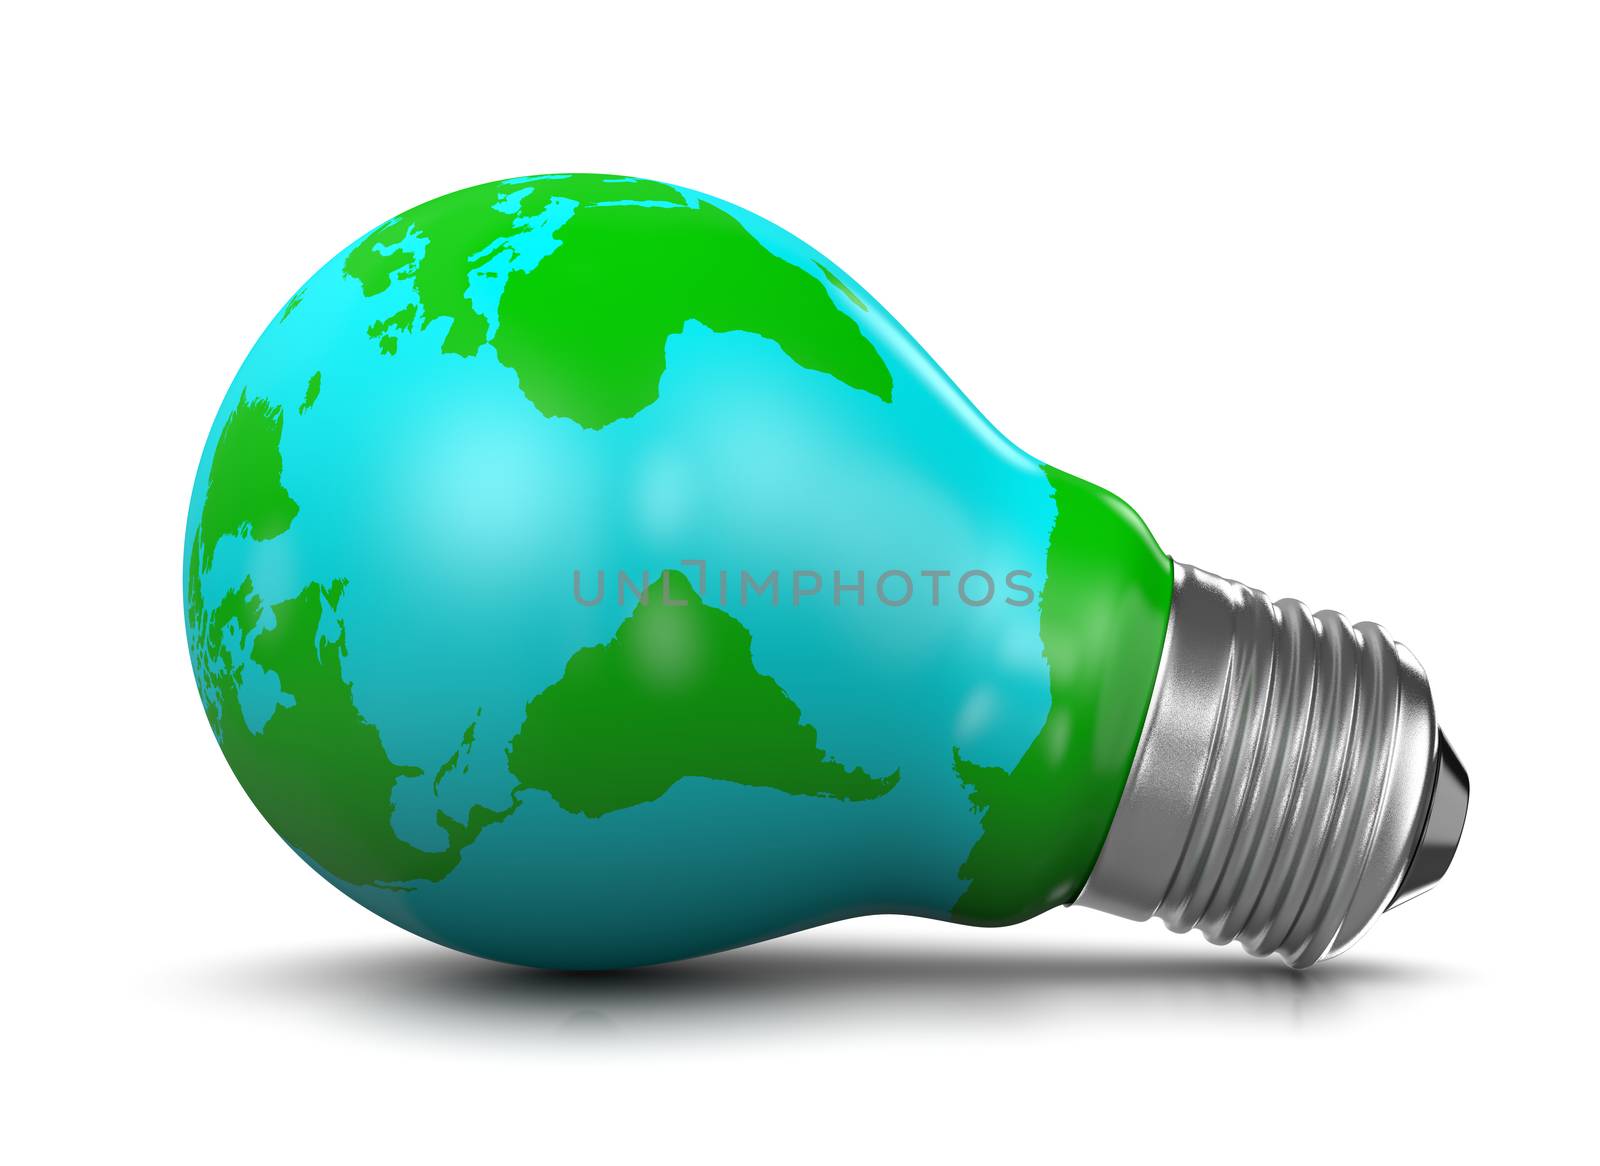 Light Bulb Covered with a World Map, 3D Illustration on White Background